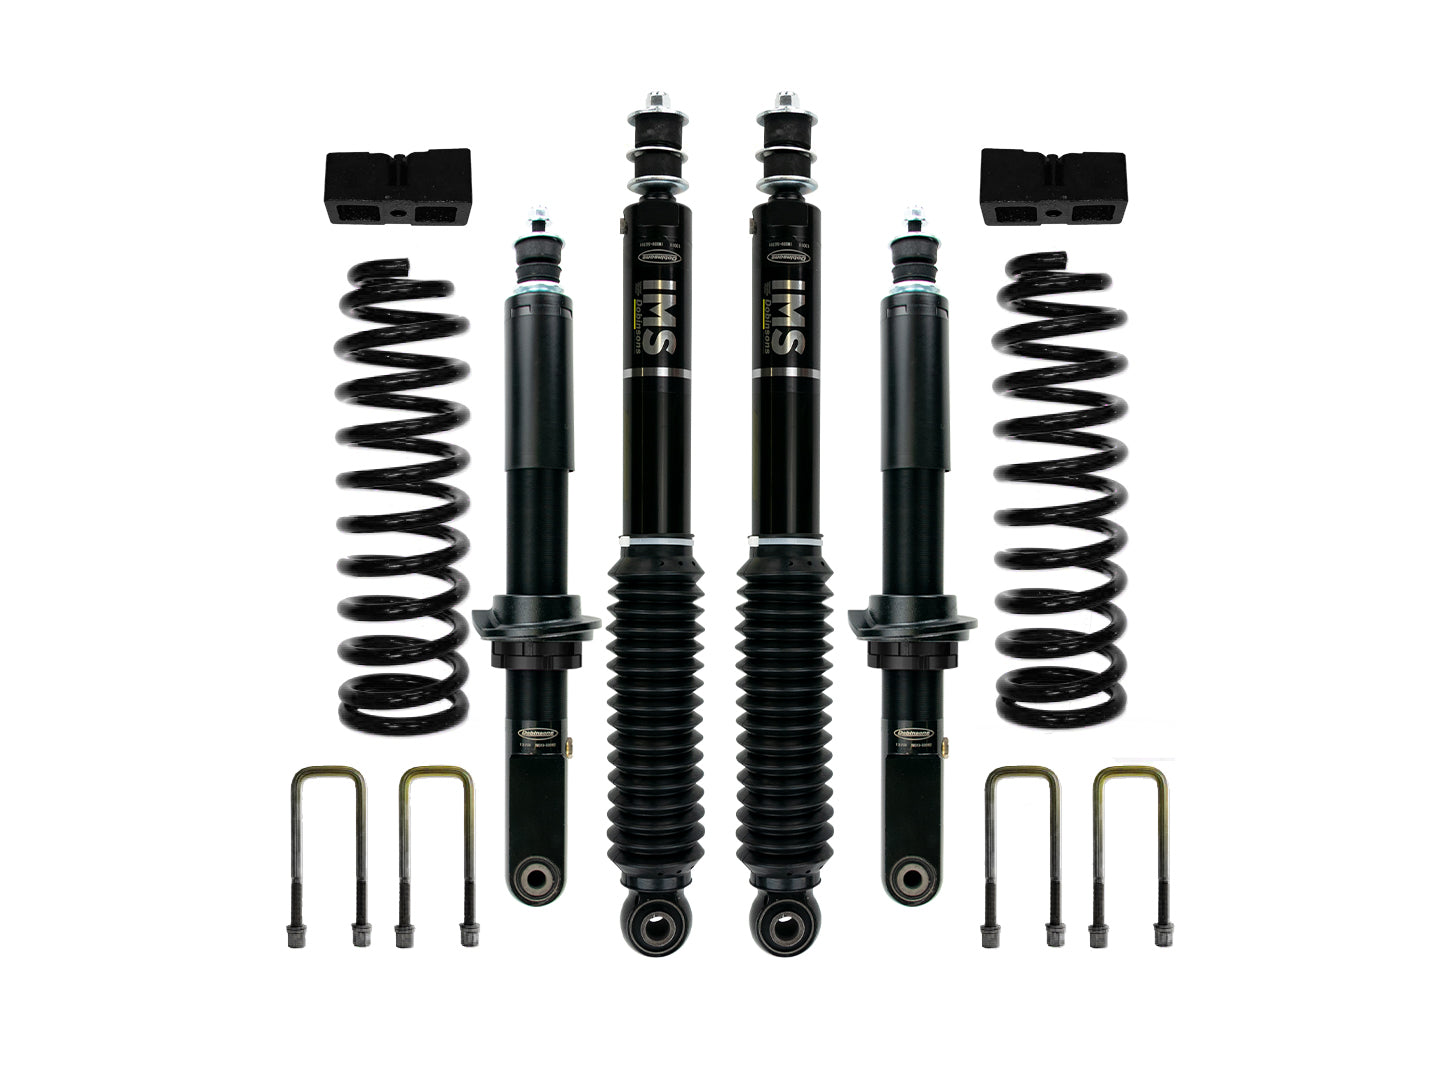 Dobinsons 2.0" to 3.0" IMS Lift Kit for Toyota Hilux Revo Dual Cab 2015 and on with Quick Ride Rear